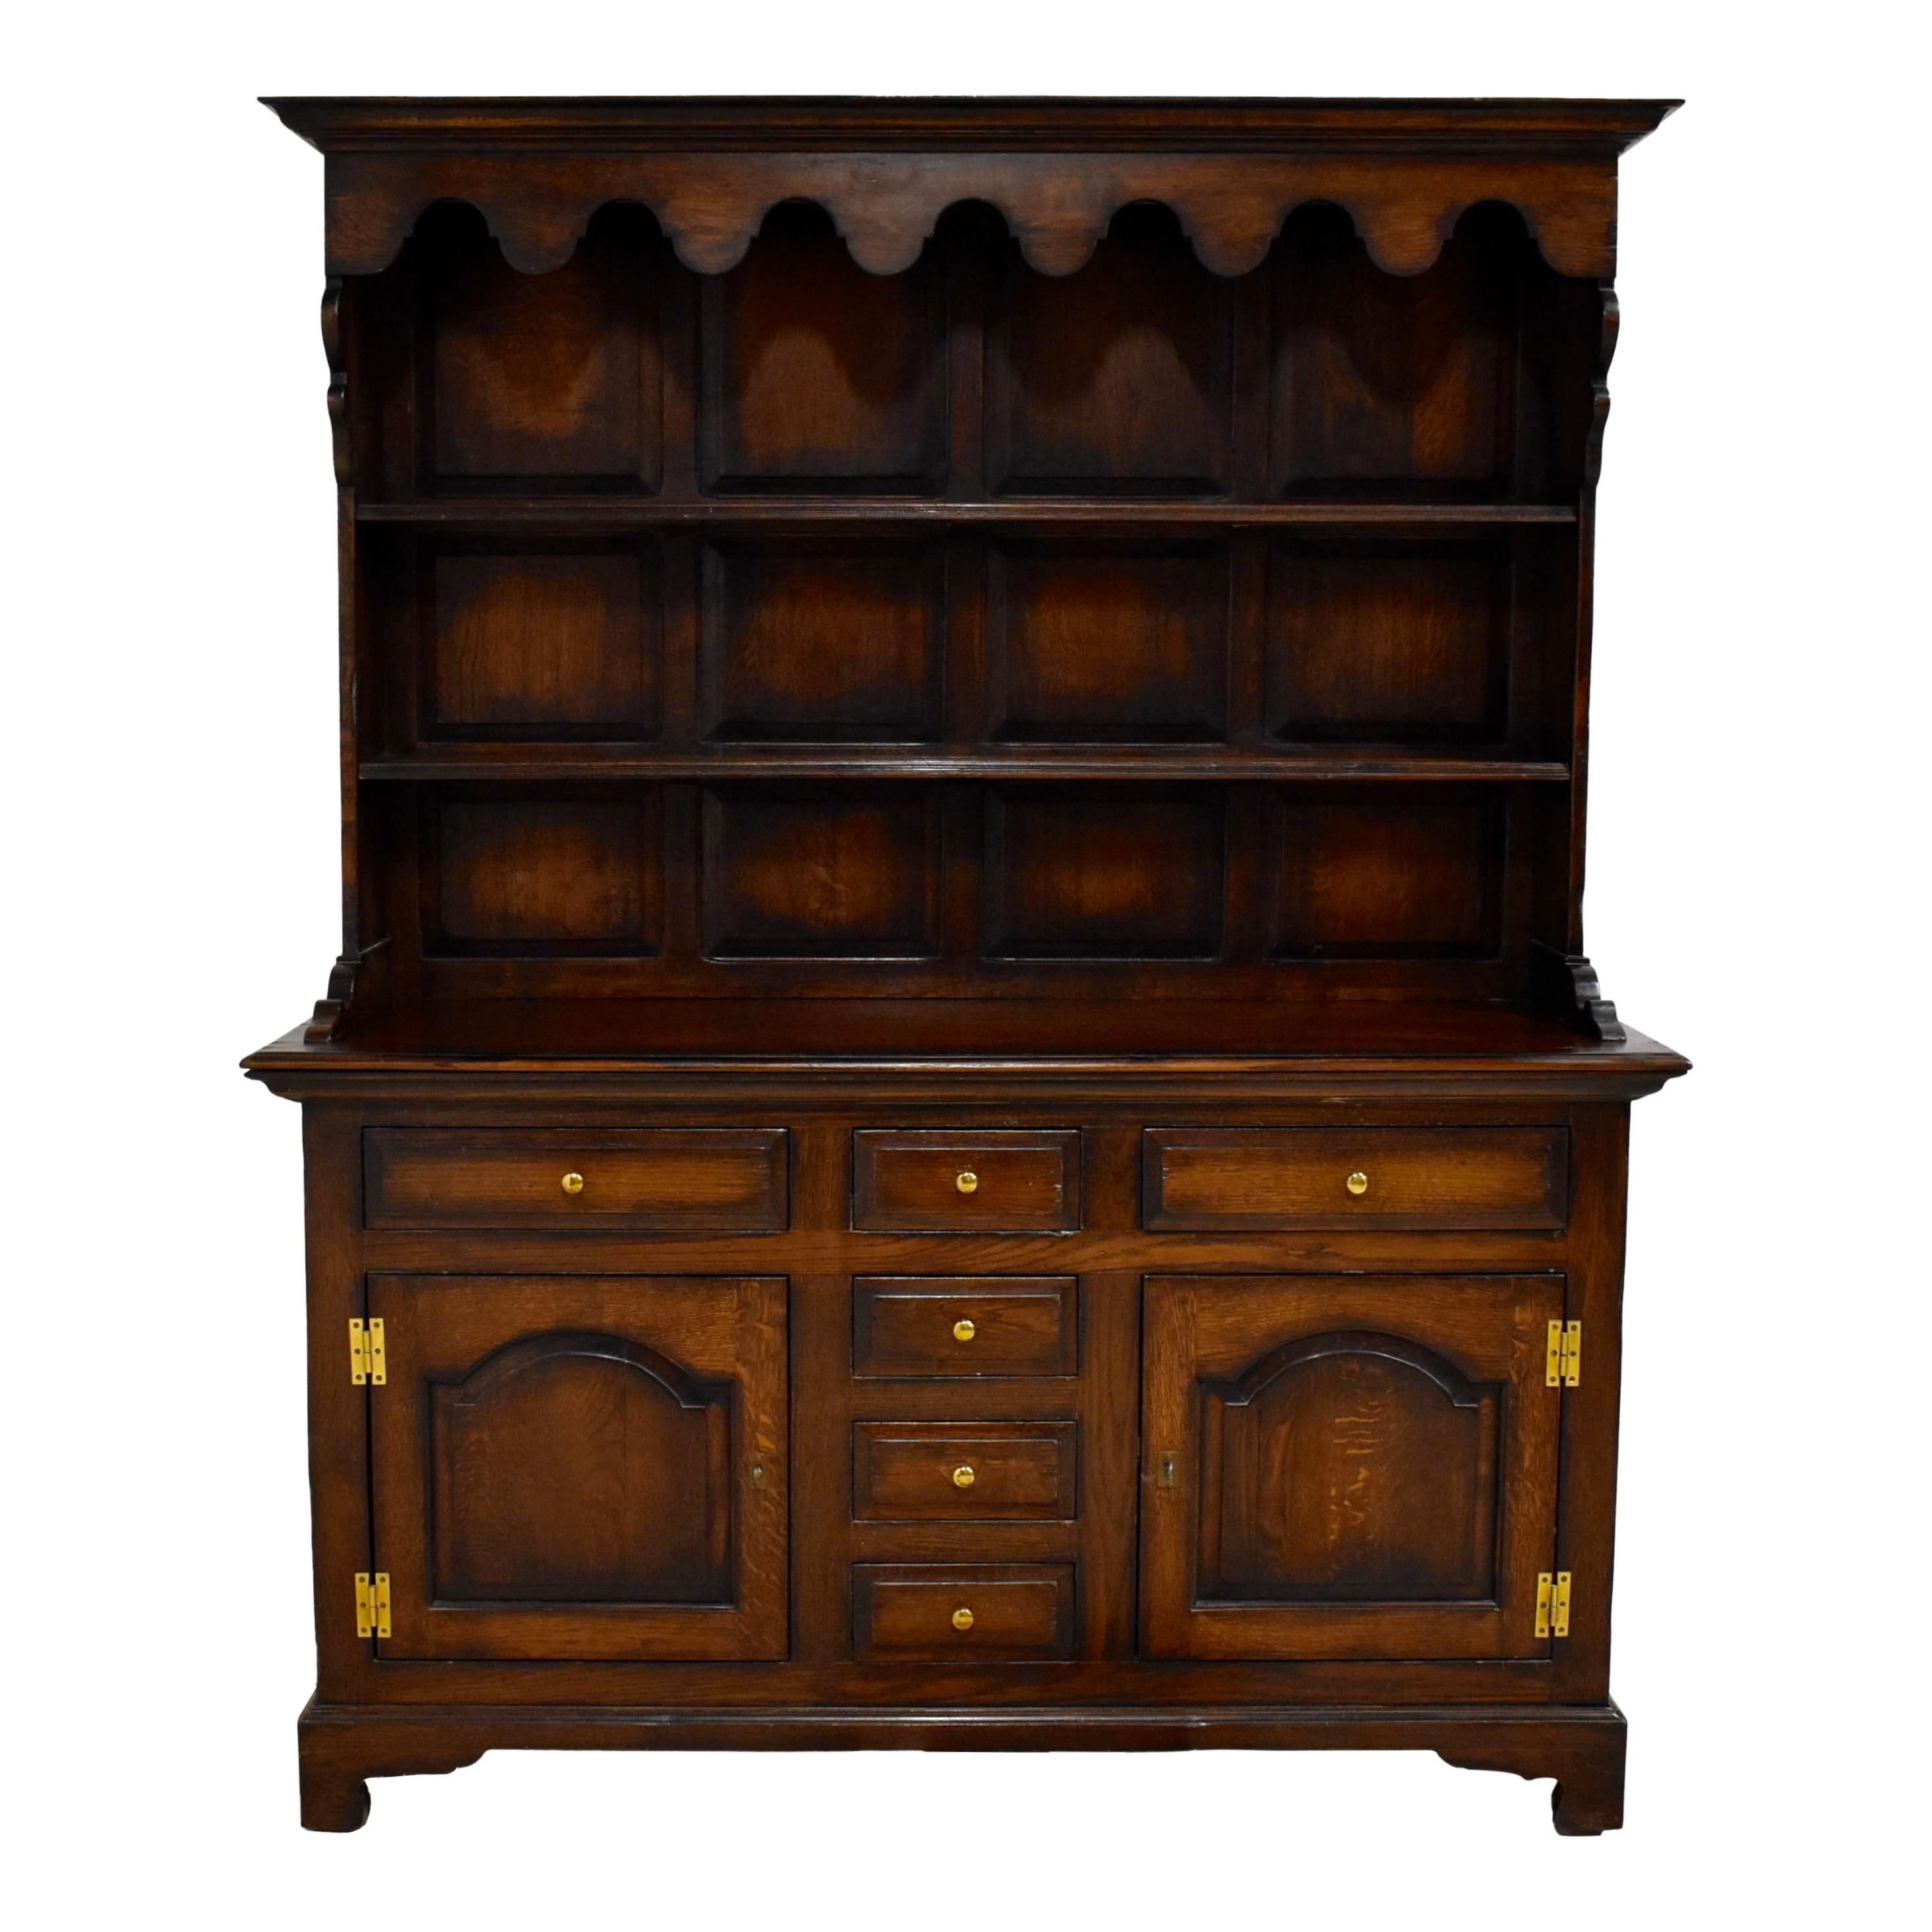 This charming vintage cupboard is crafted from European oak and finished with a staining technique that darkens the edges, creating depth and an aged appearance. Intentional grooving in the wood before the cupboard was stained gives it a rustic